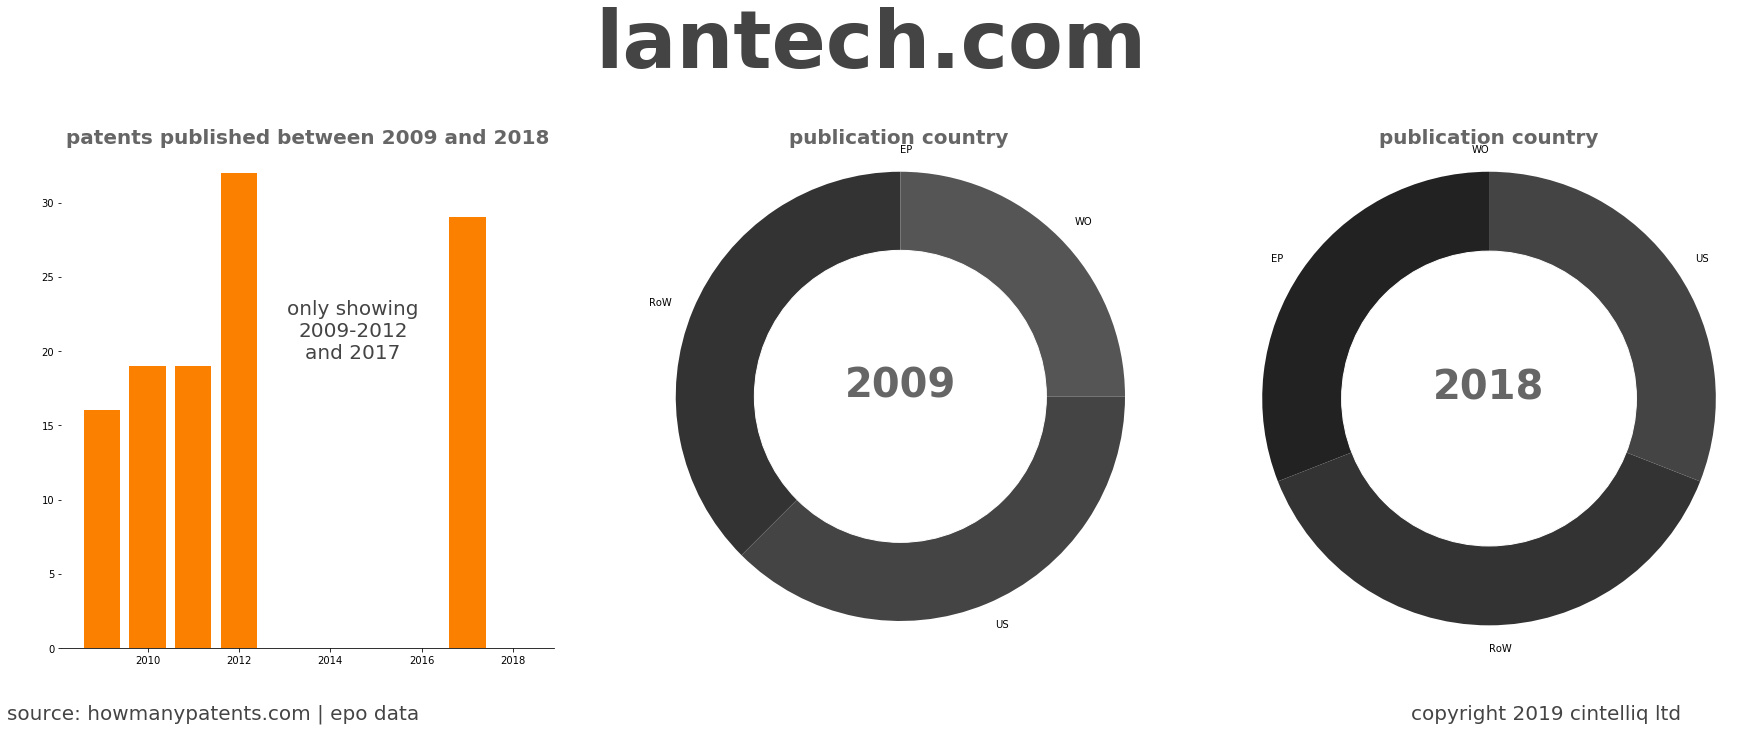 summary of patents for Lantech.Com